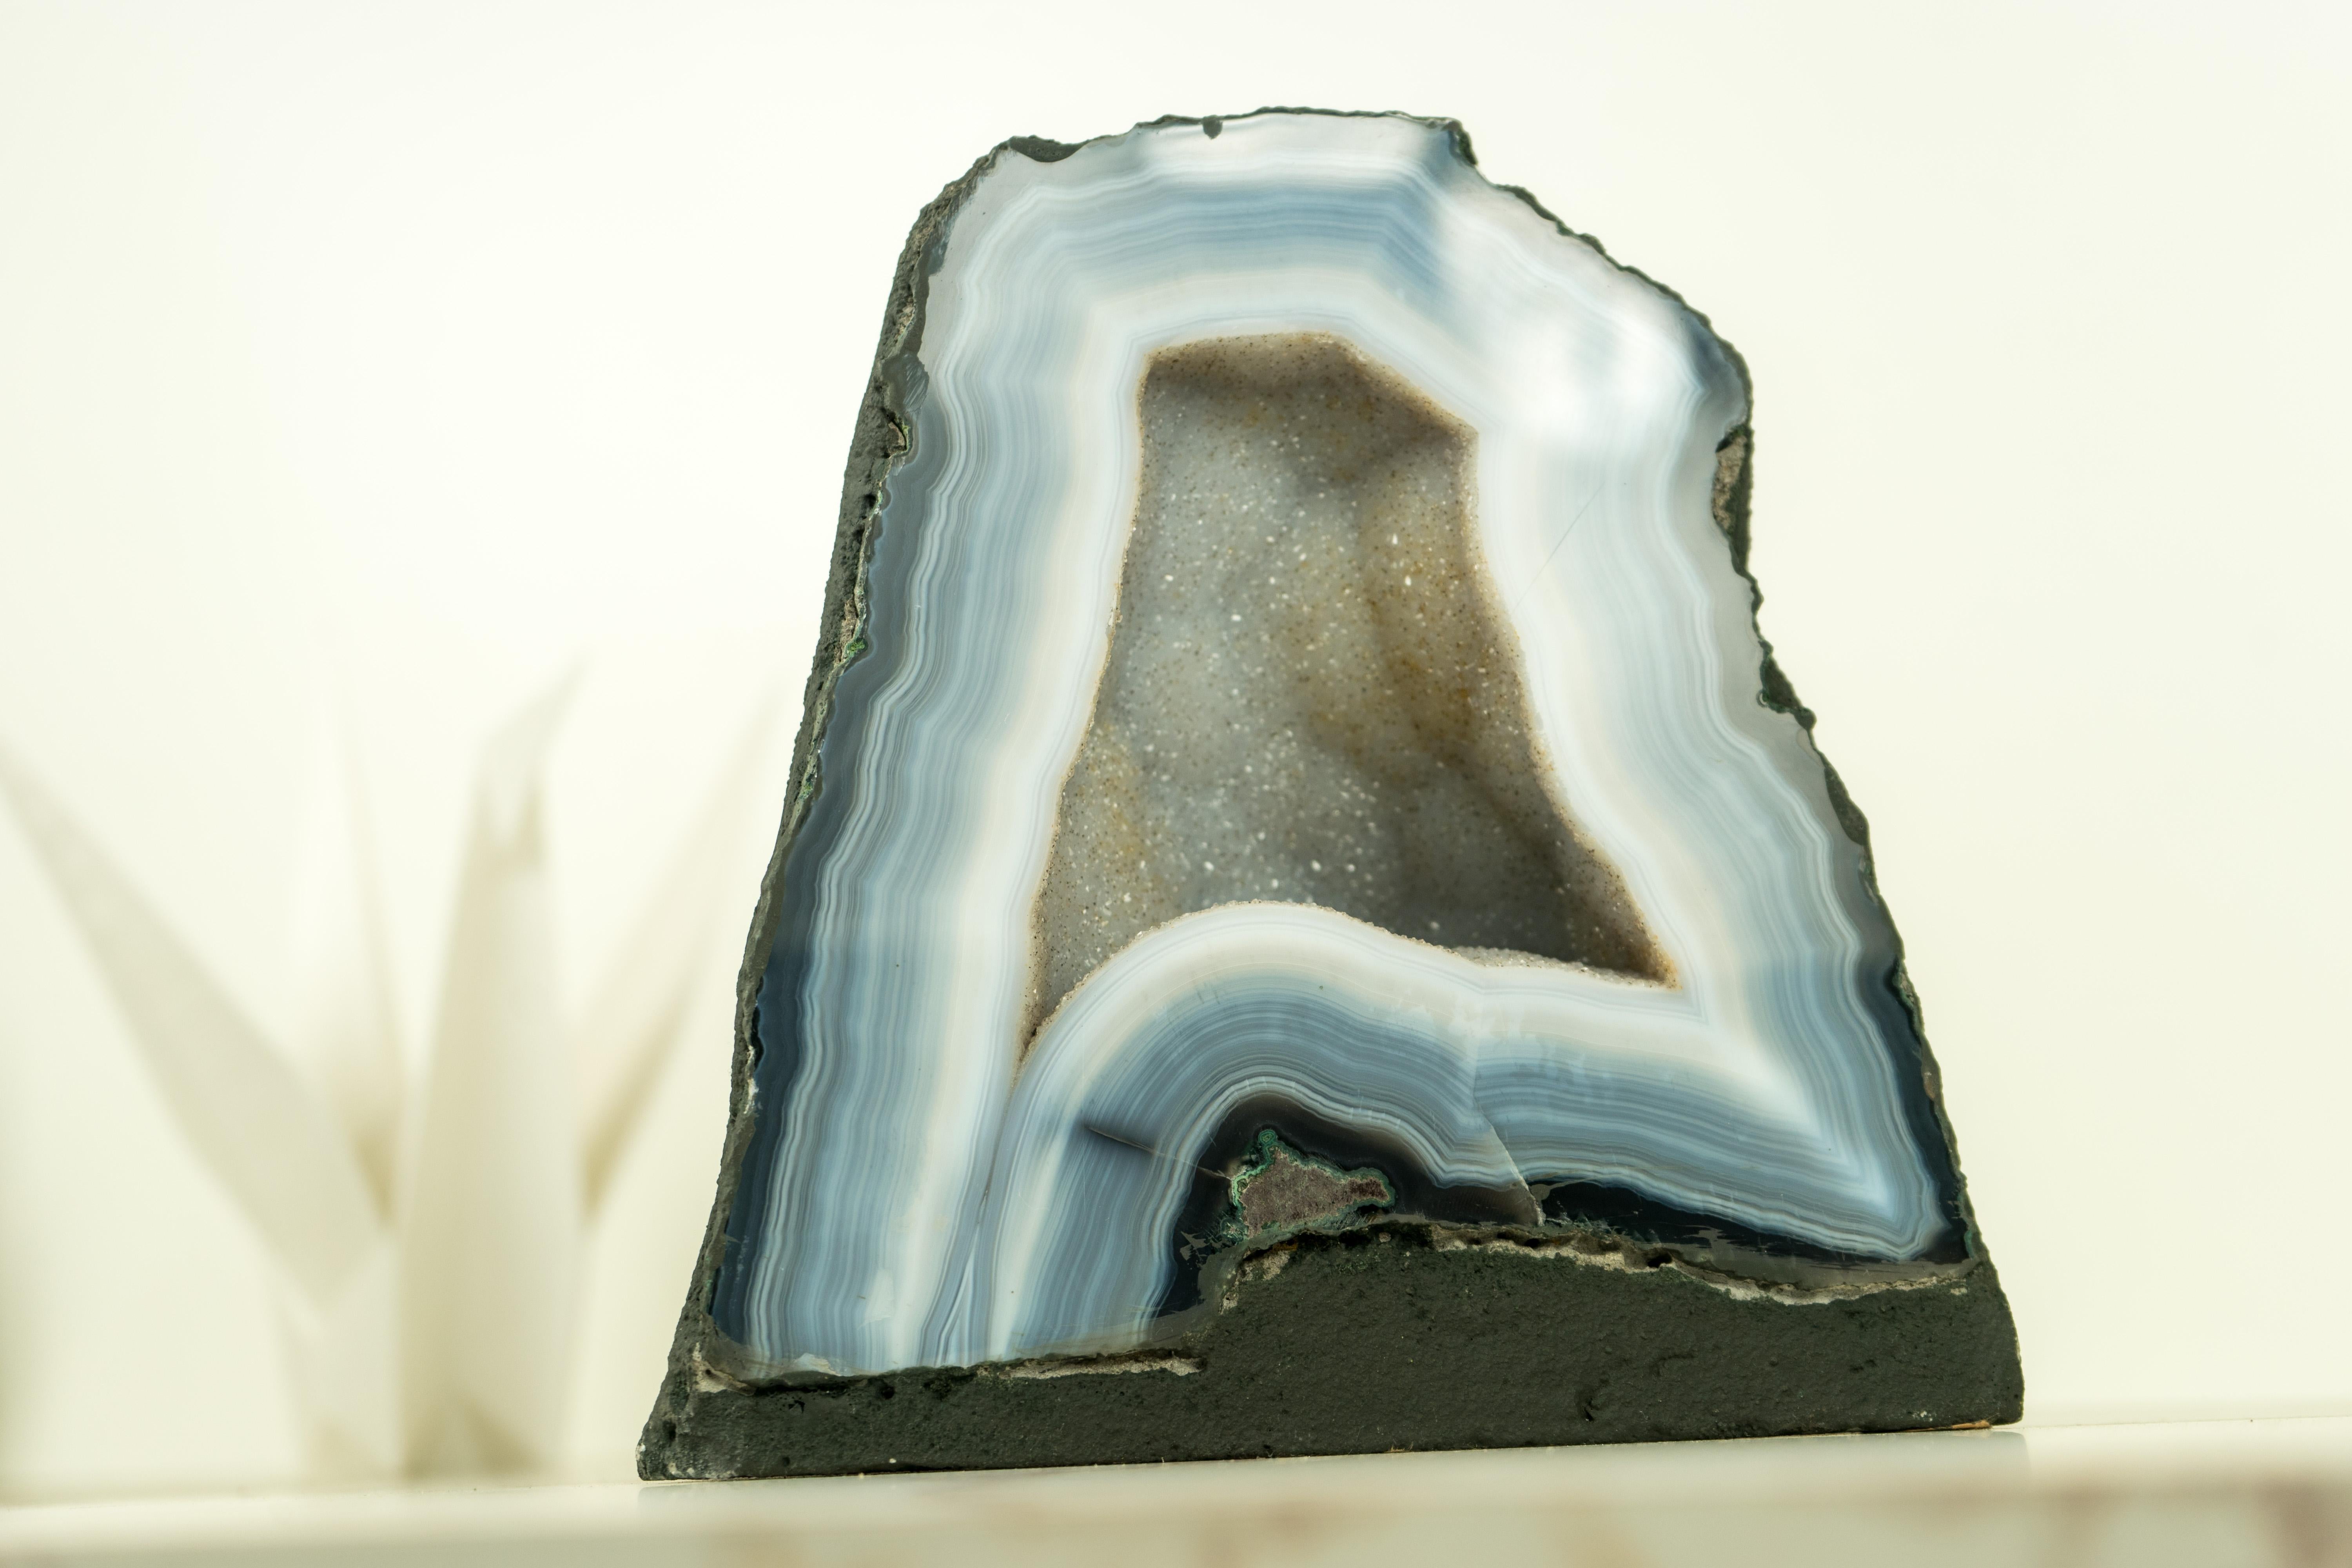 Small yet stunning, this Blue and White Lace Agate Geode brings numerous flawless natural agate laces, along with sparkly white galaxy crystals that form the beautiful aesthetics of the geode. It's undoubtedly a standout specimen for your space and